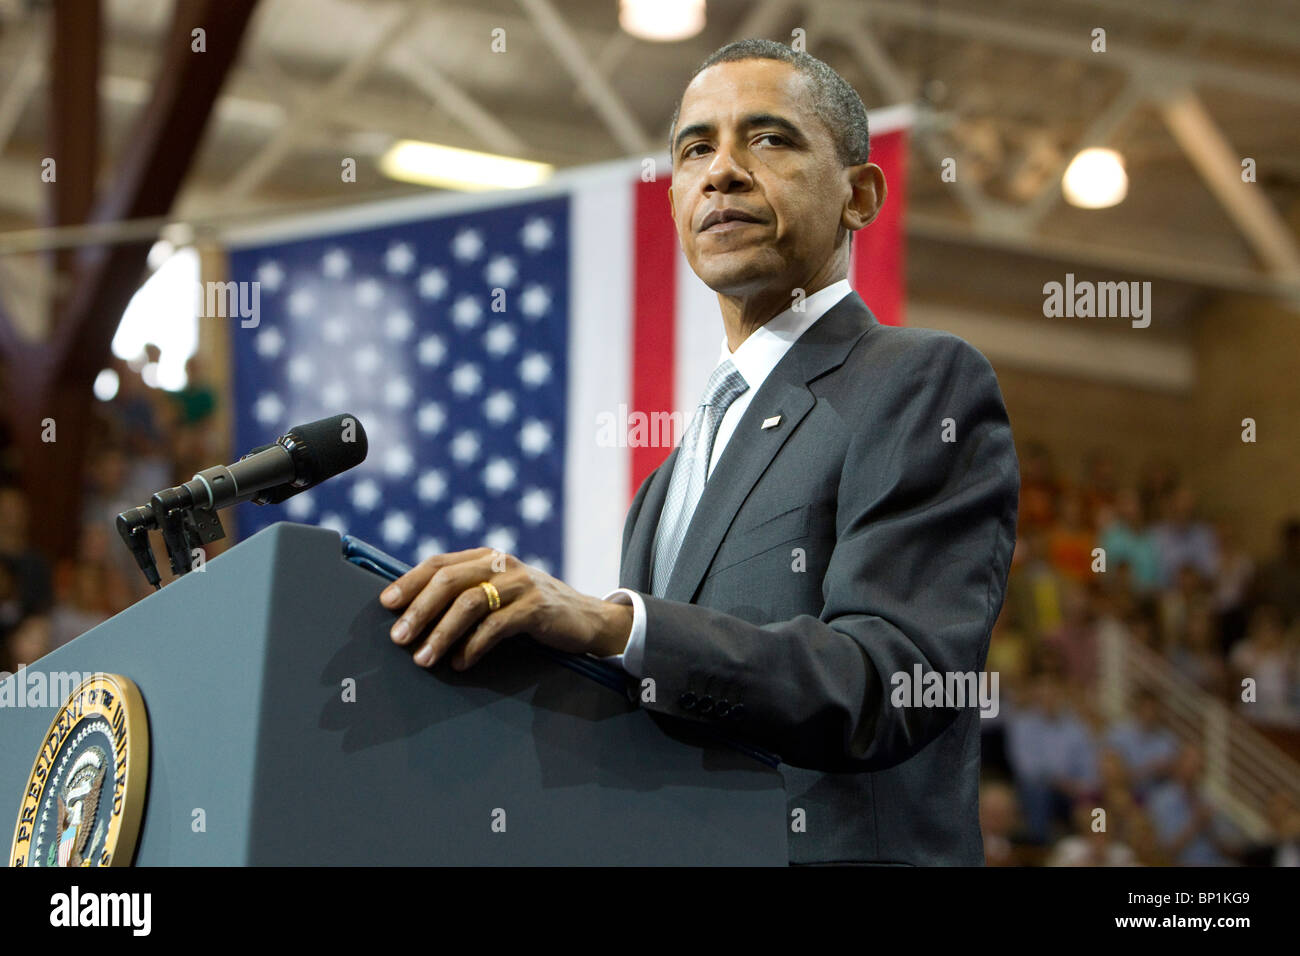 U.S. President Barack Obama speaks to invited students and faculty at the University of Texas at Austin Stock Photo